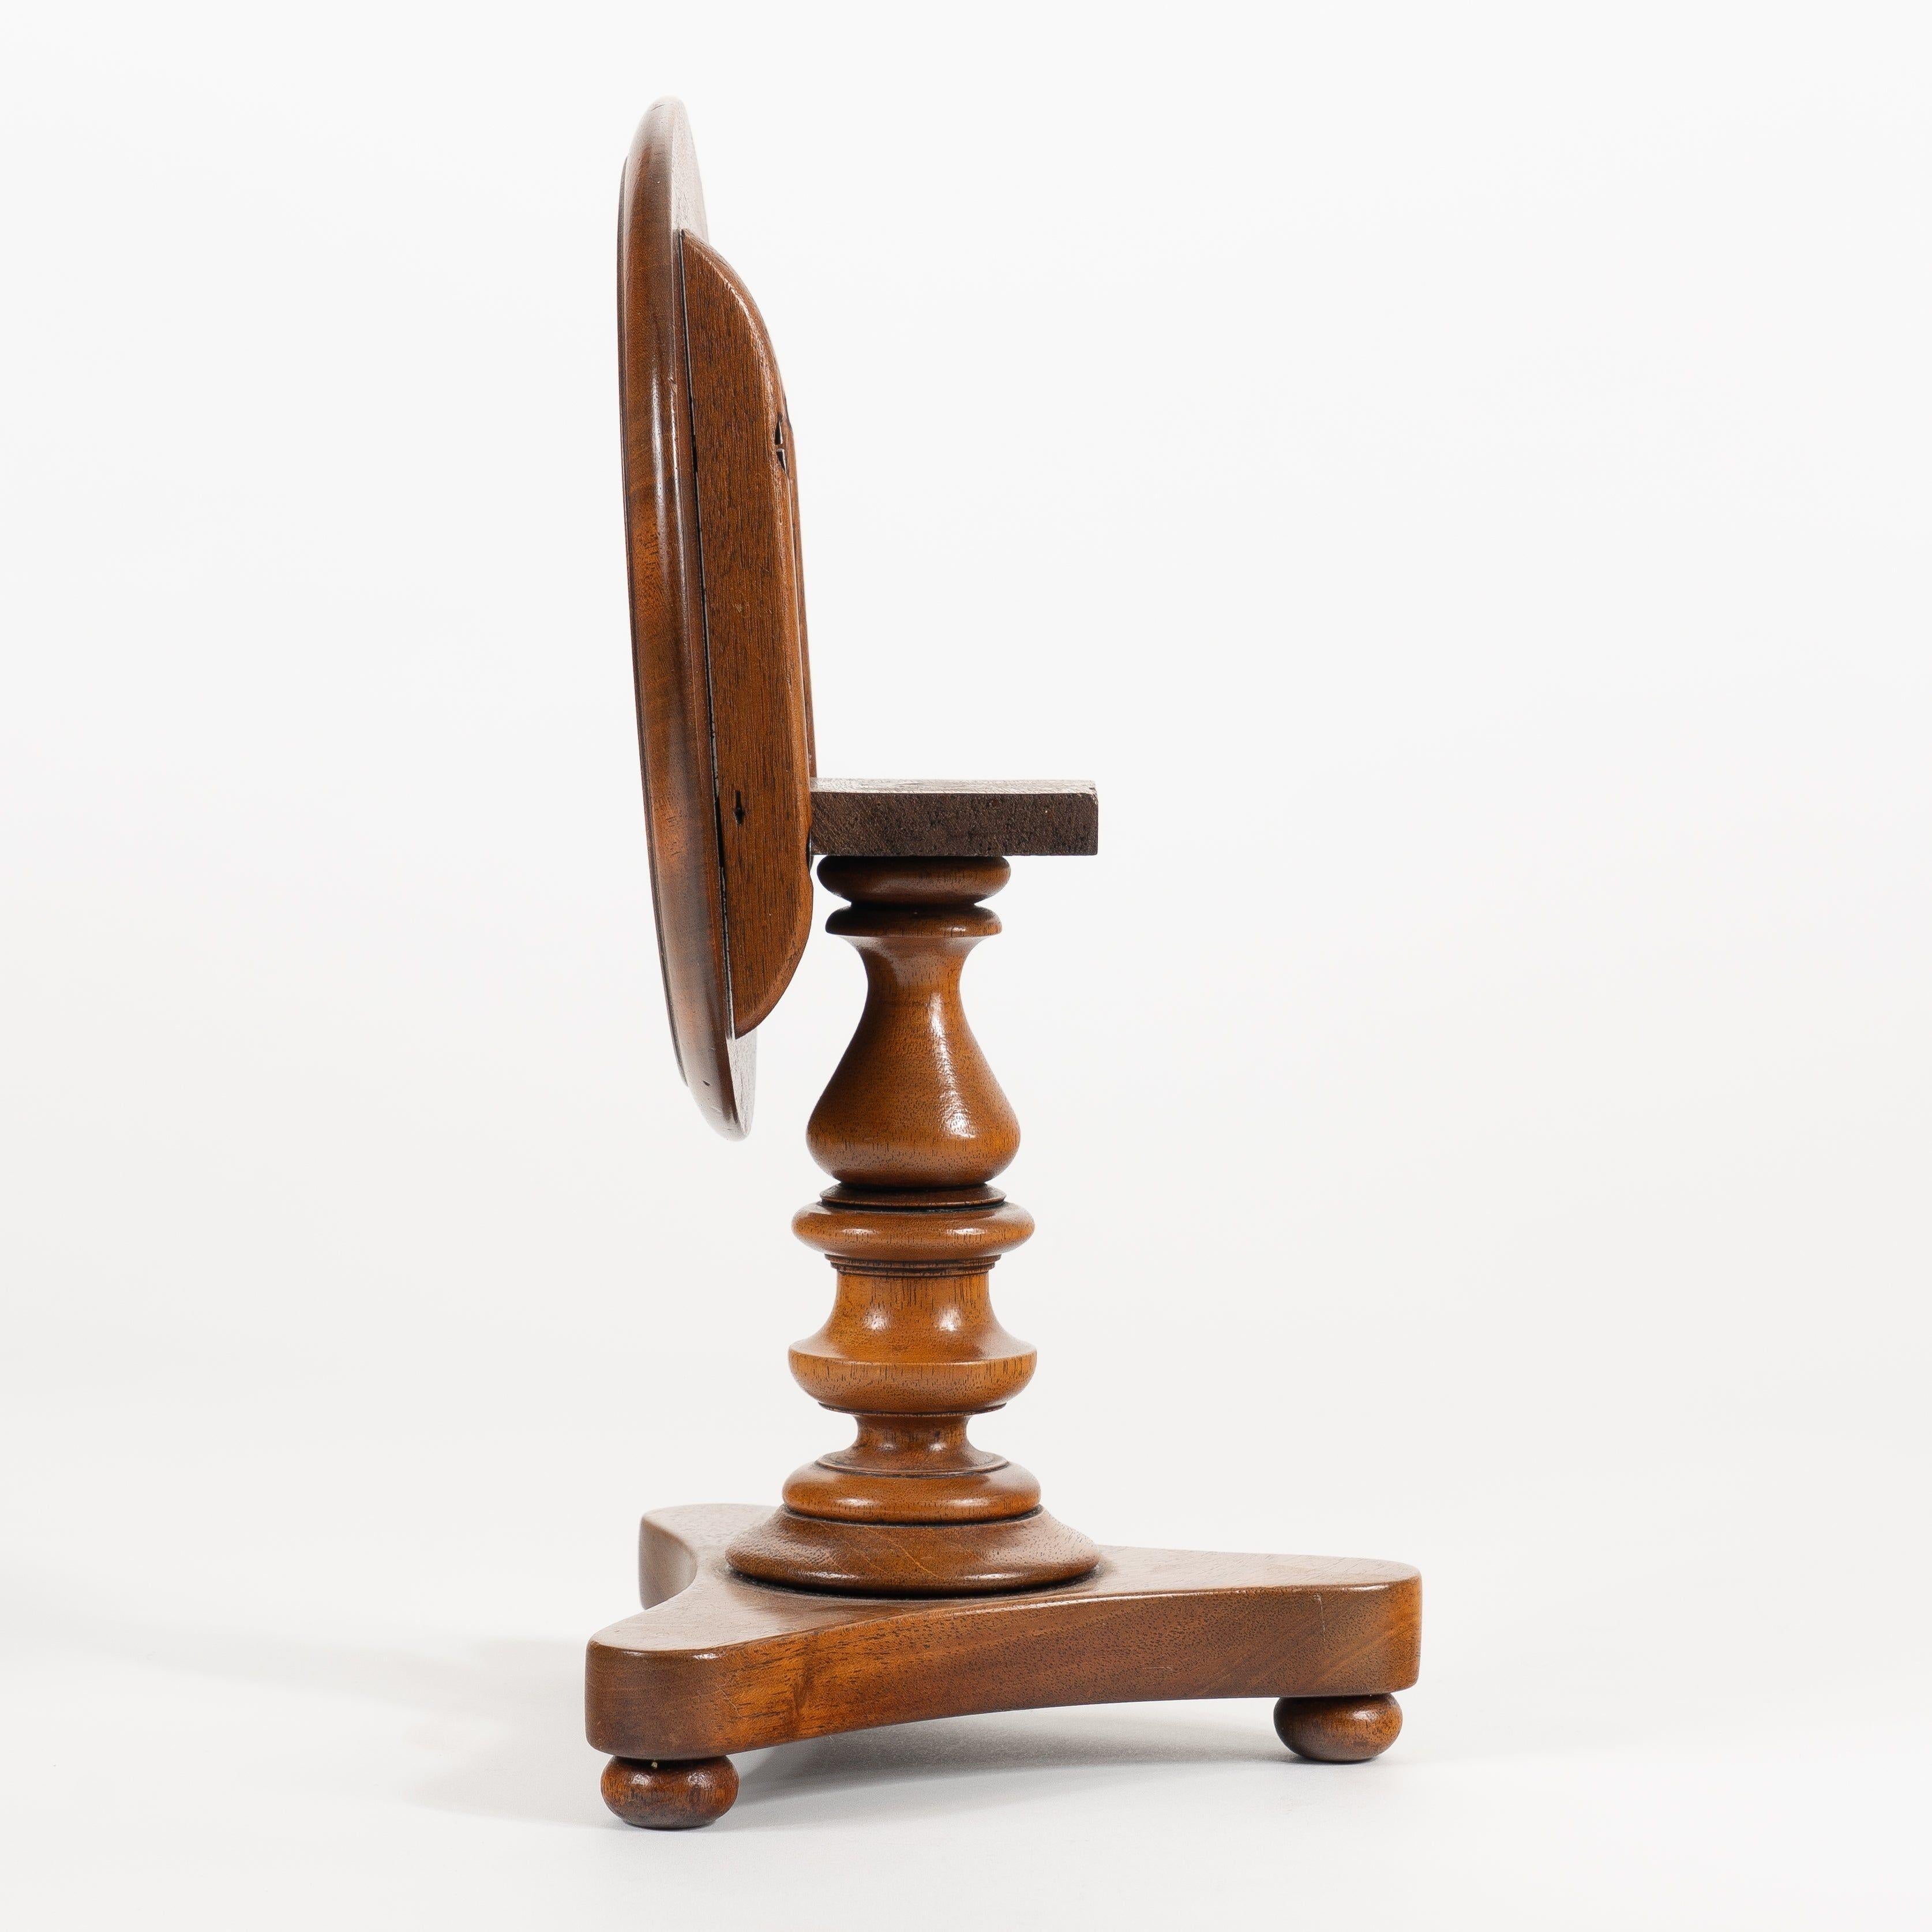 American Classical American Miniature Tilt Top Miniature Table/Candle Stand by Thomas Clowney, 1840